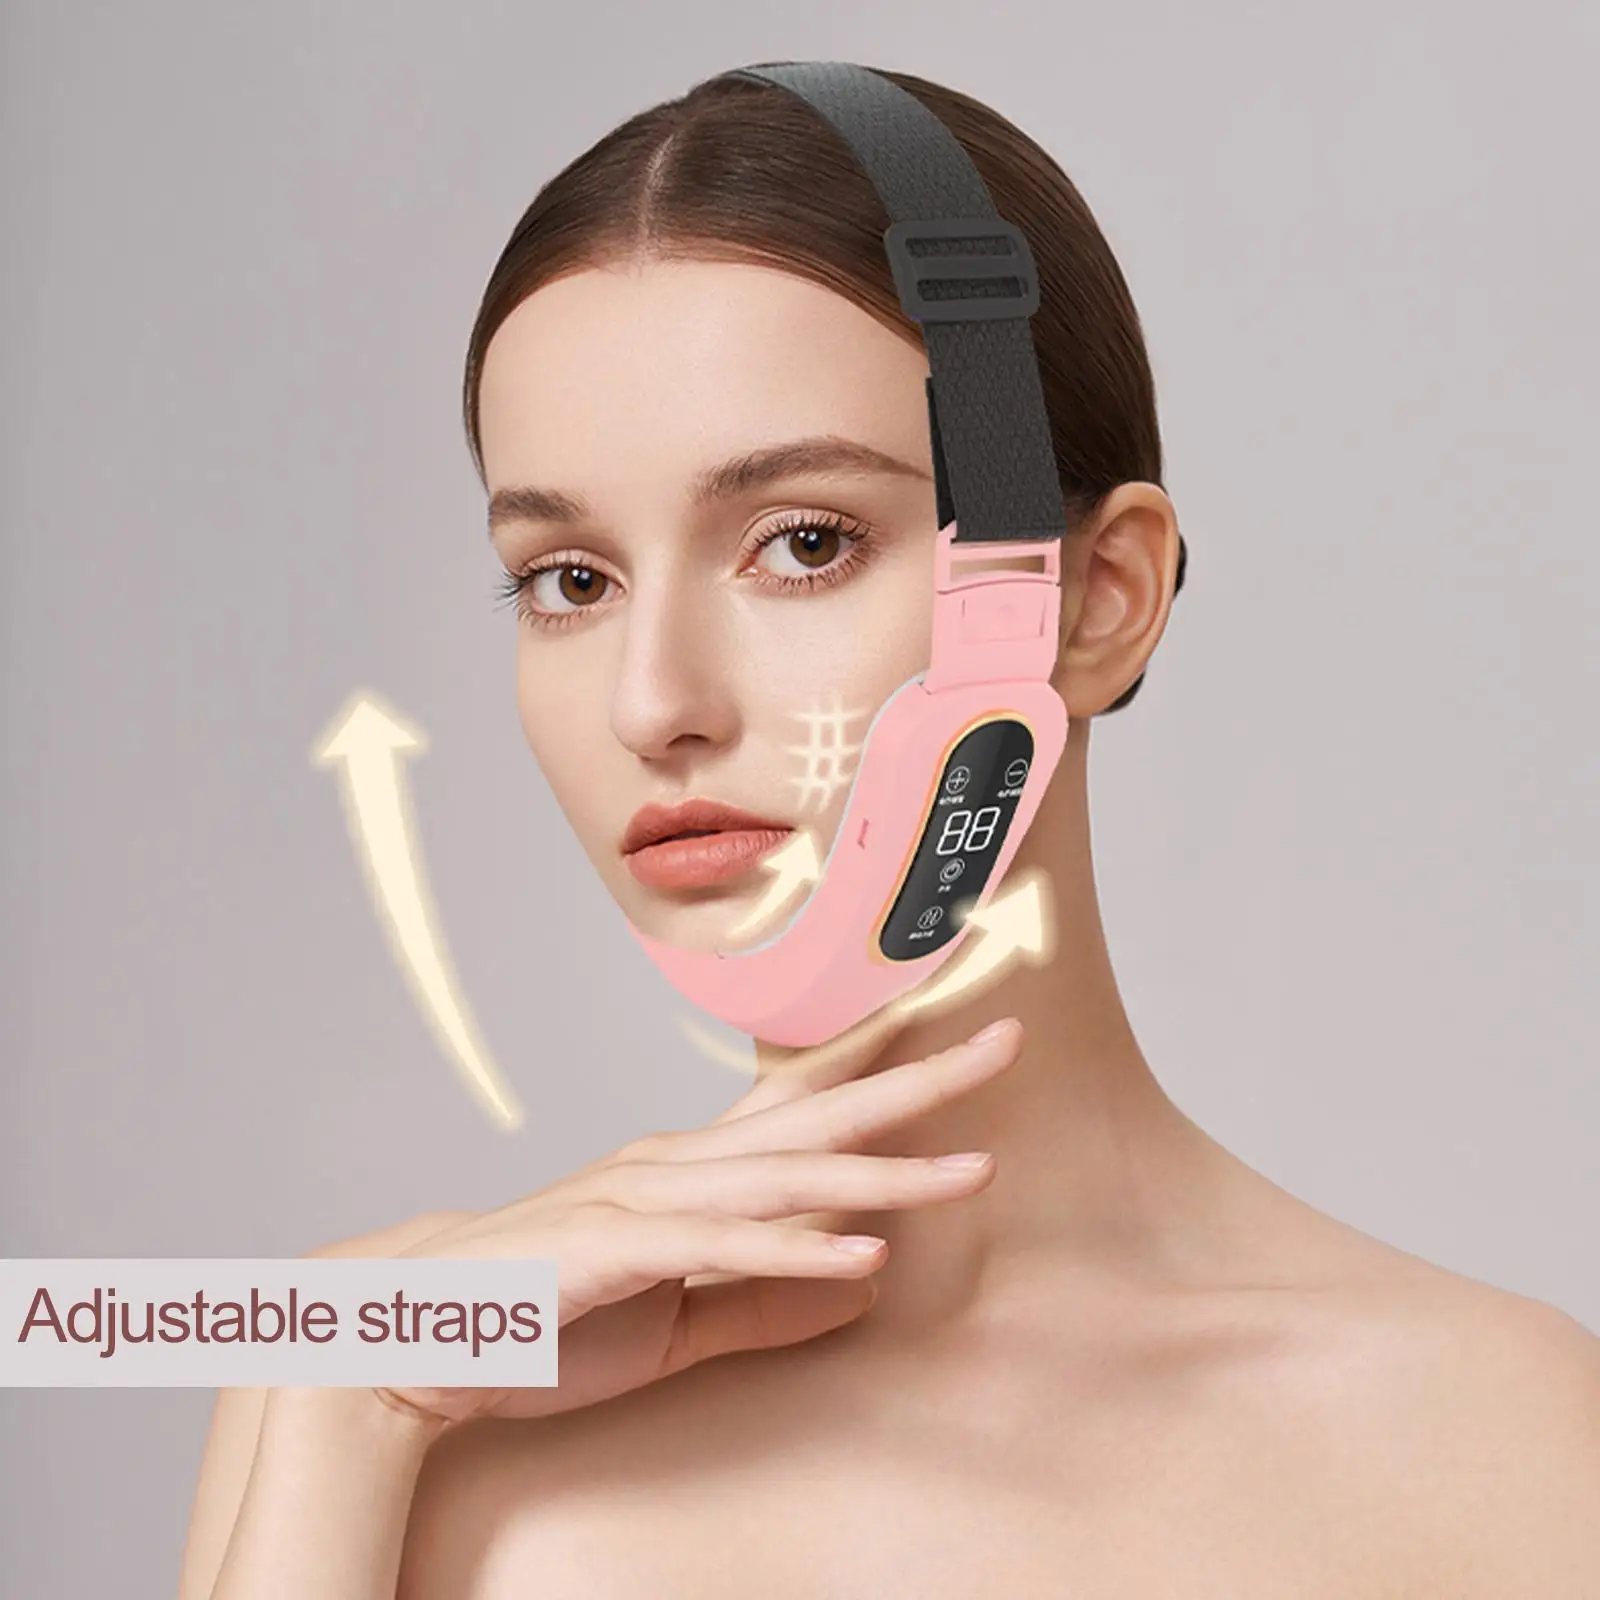 V Face Machine Photon Therapy Machine Portable LED Shaping Massager Face Slimming Strap for Sagging Double Chin Removal Women